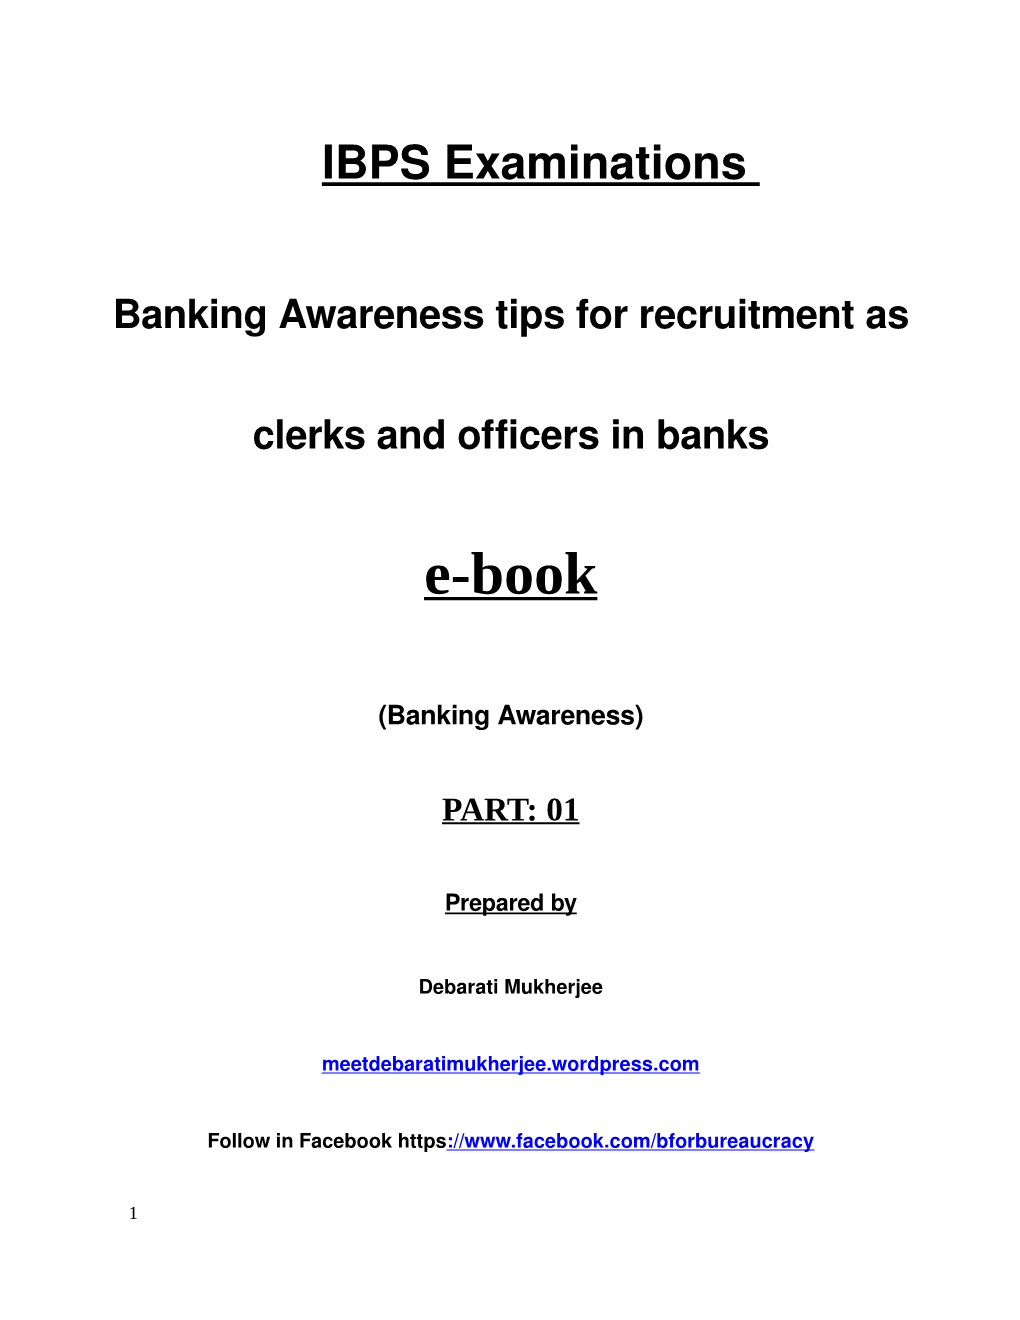 Complete Book of Banking & Computer Awareness by Debarati